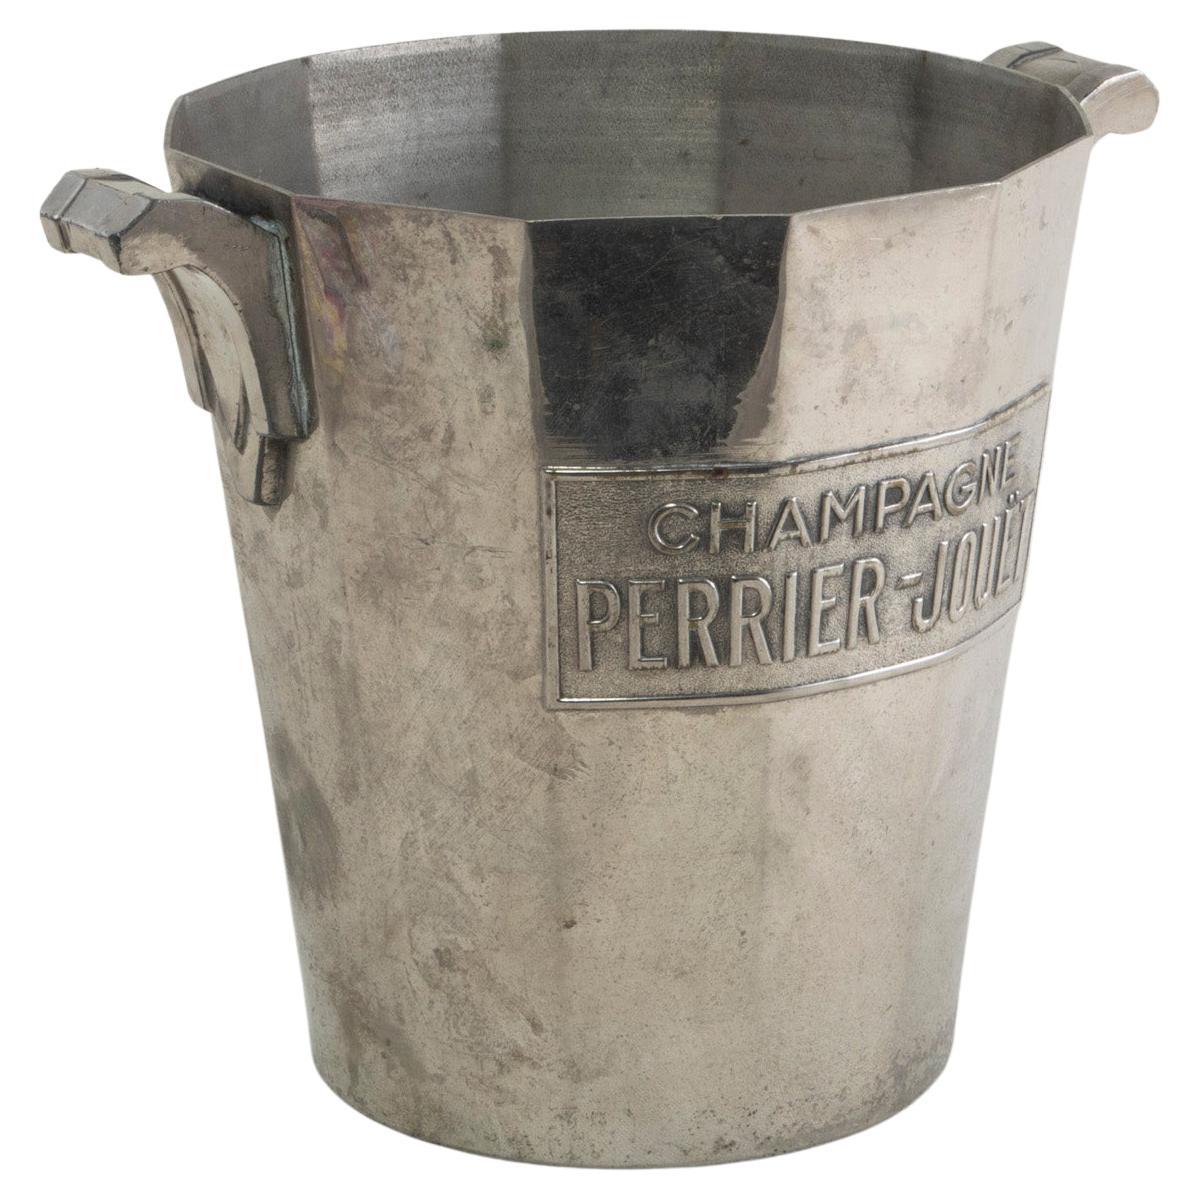 This early twentieth century French silver plate champagne bucket features the name of the champagne producer, Perrier Jouet. The bottom is stamped Argit Paris, Made in France. Art Deco handles allow for easier carrying and presentation. A wonderful